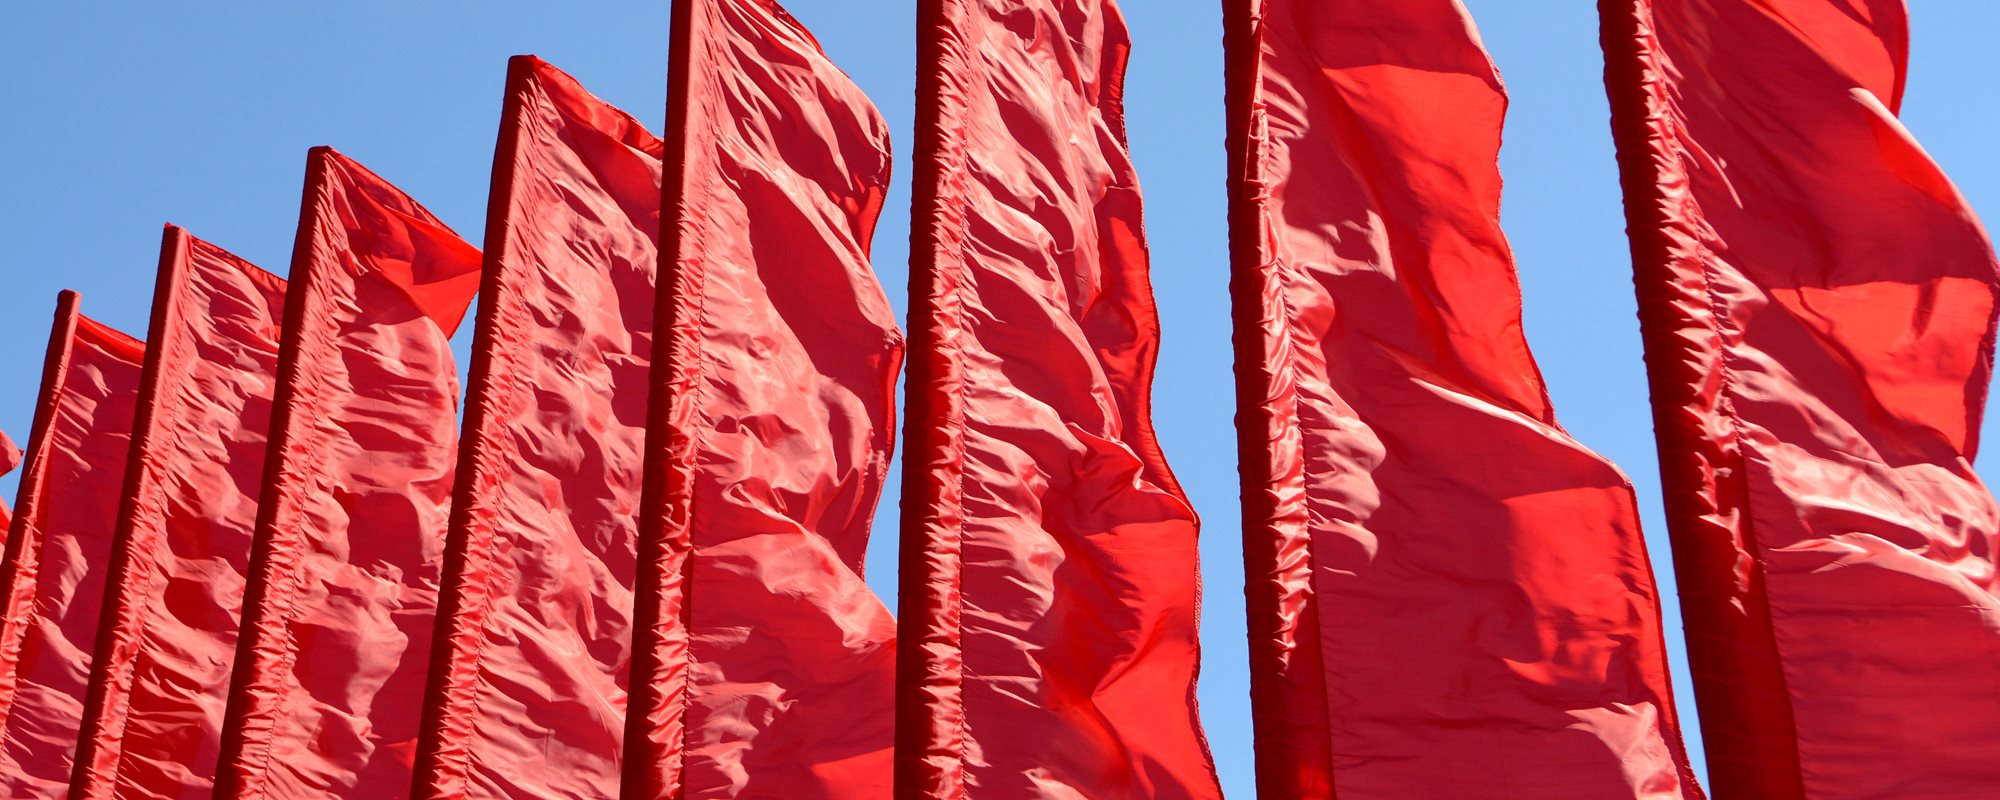 Red Flags with Sky as Background